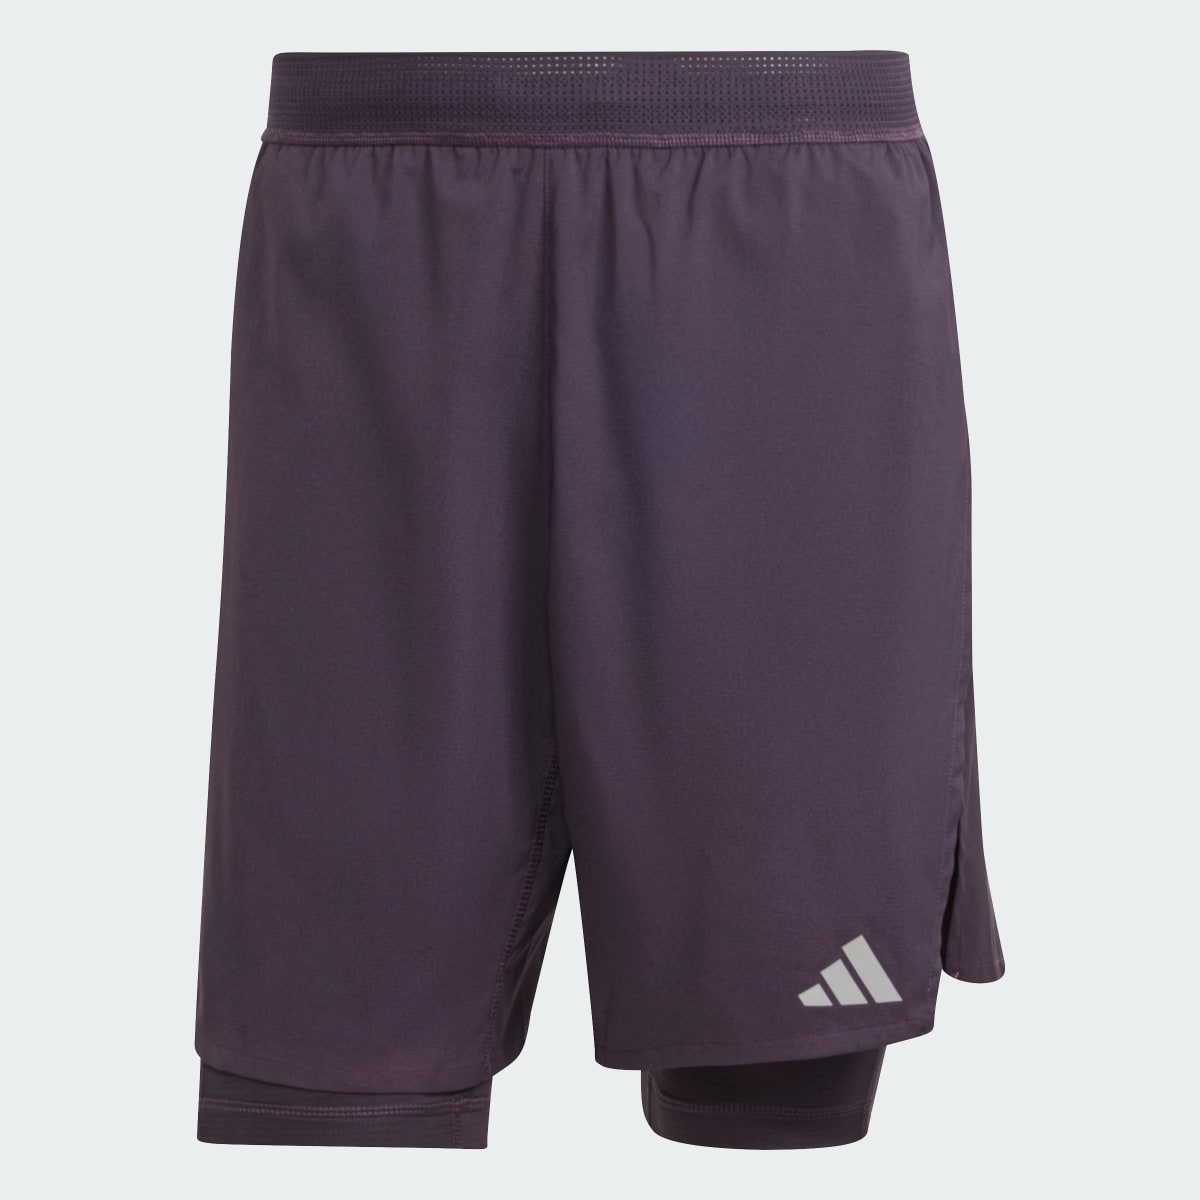 Adidas Short HIIT Workout HEAT.RDY 2-in-1. 4